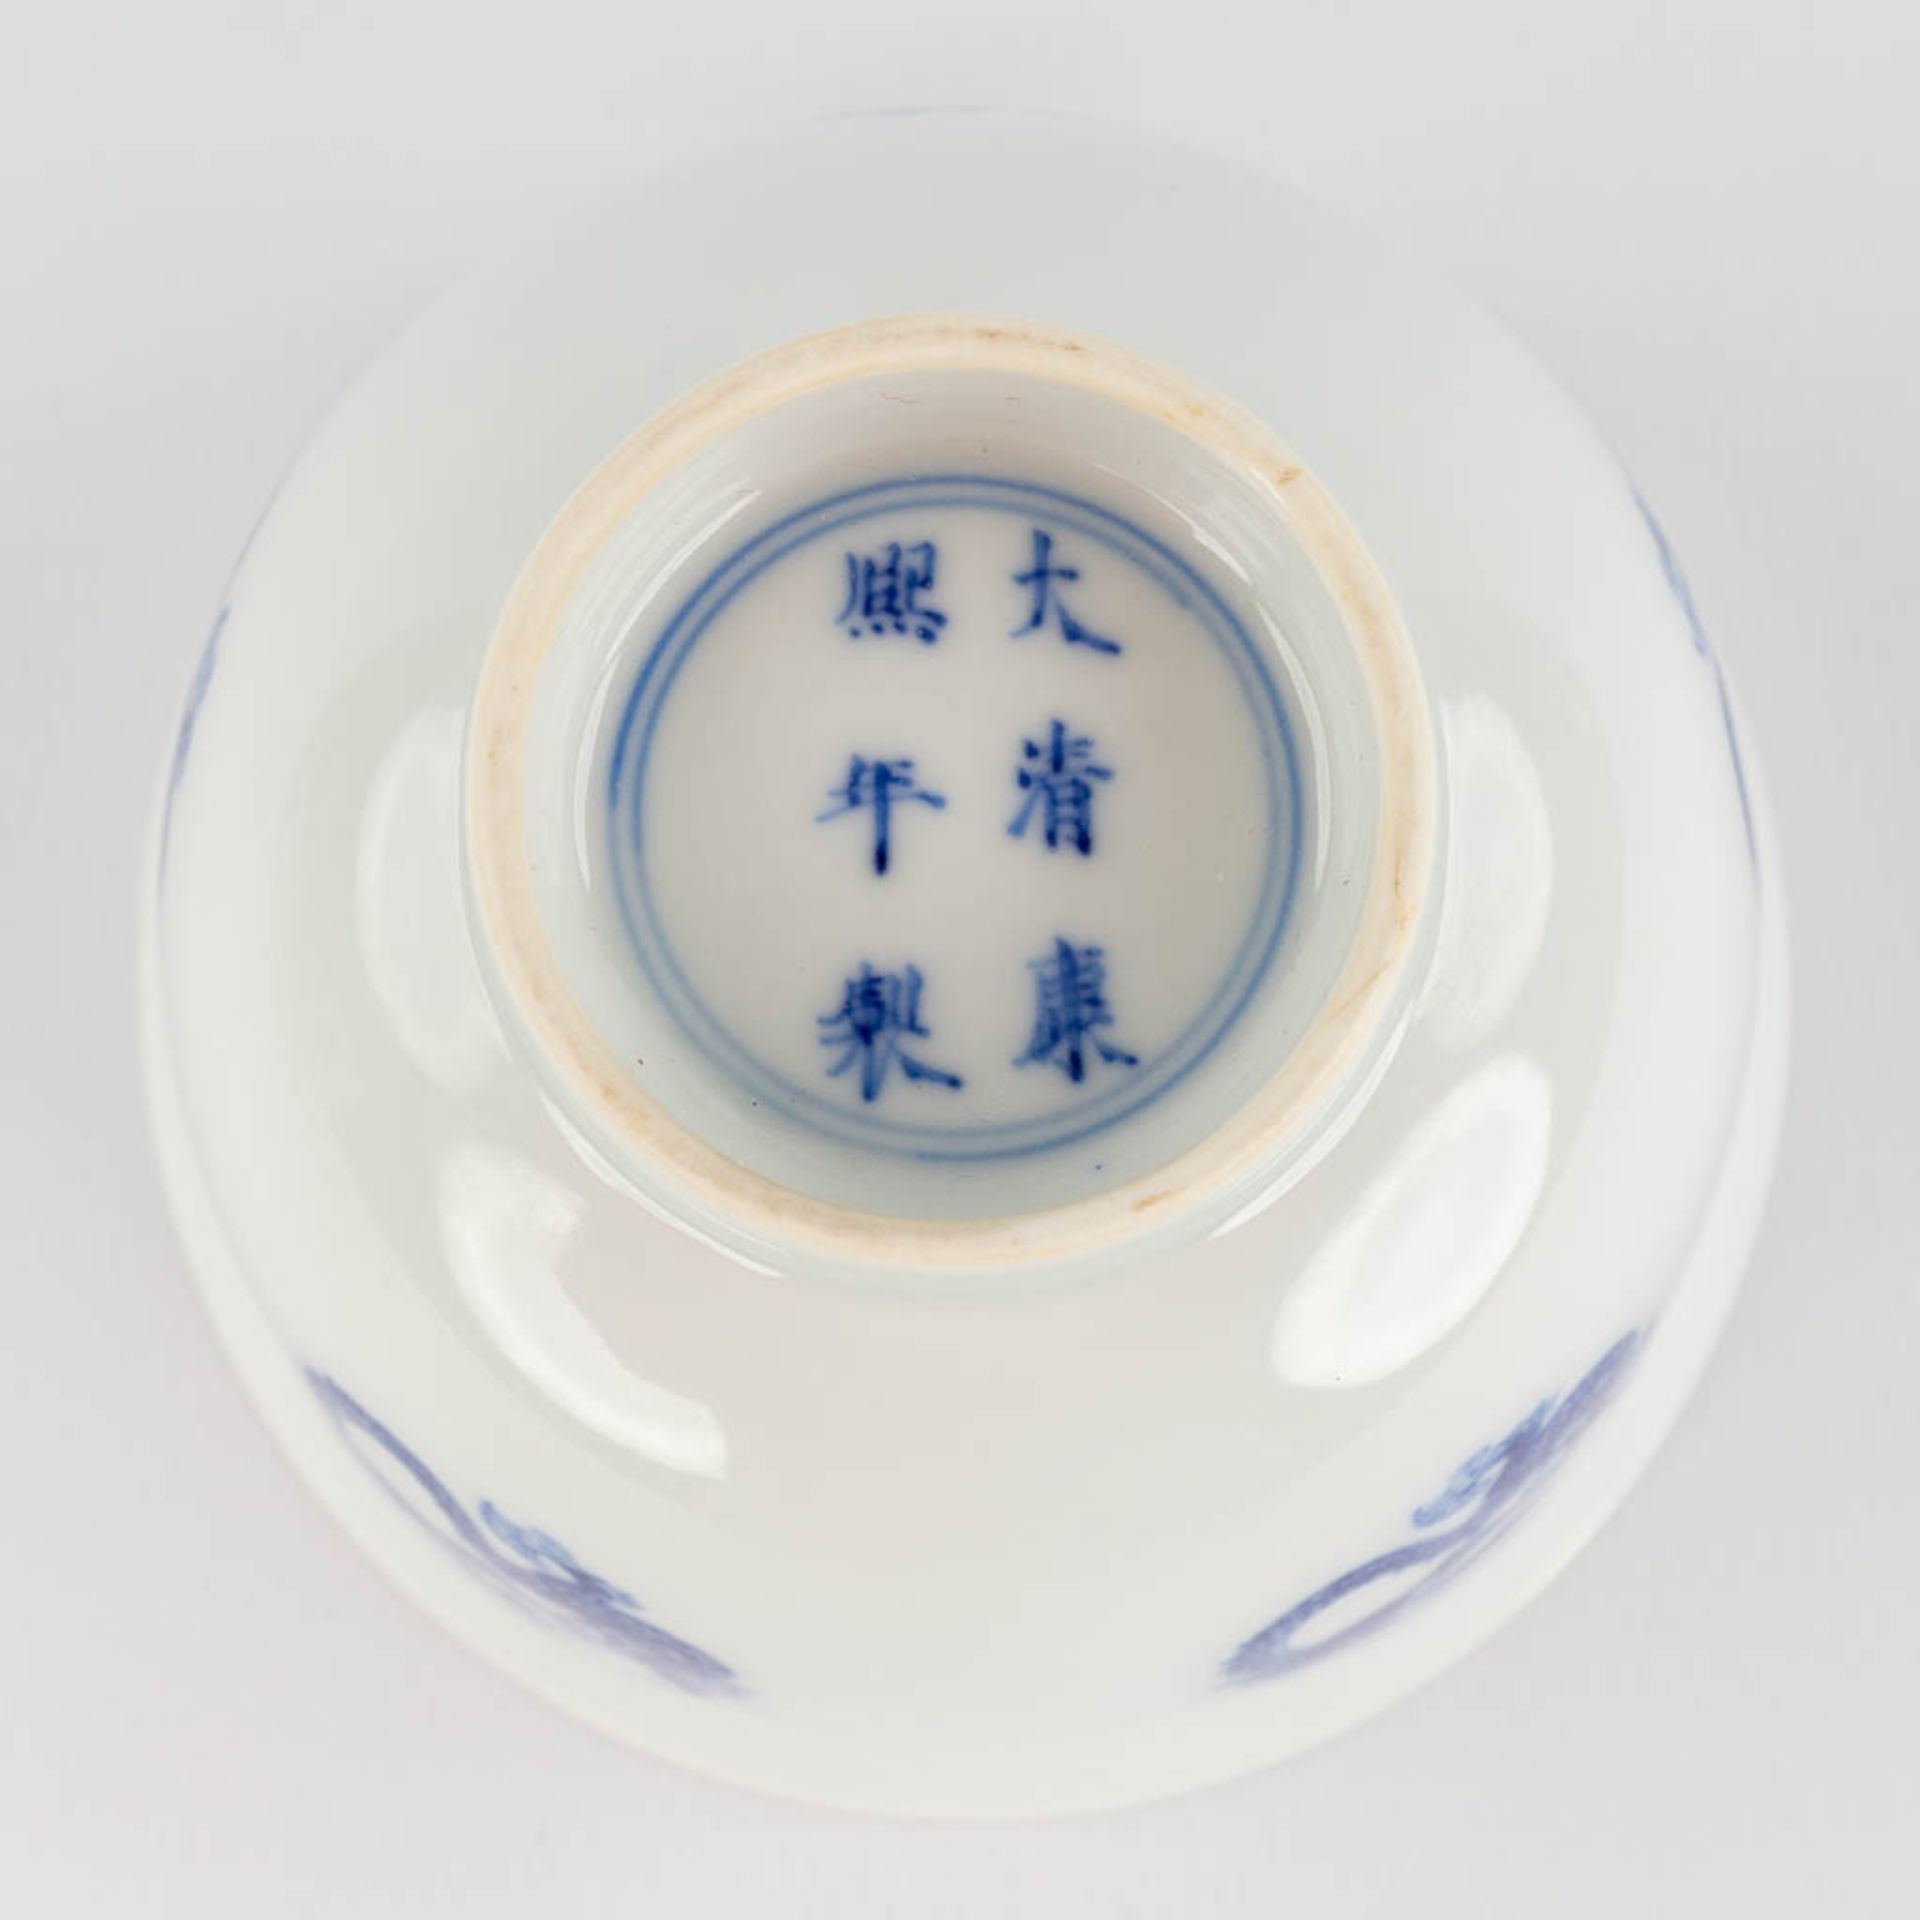 A Chinese teapot with a blue-white decor of a dragon. Kangxi mark and period. (D:9 x H:6 cm) - Image 6 of 7